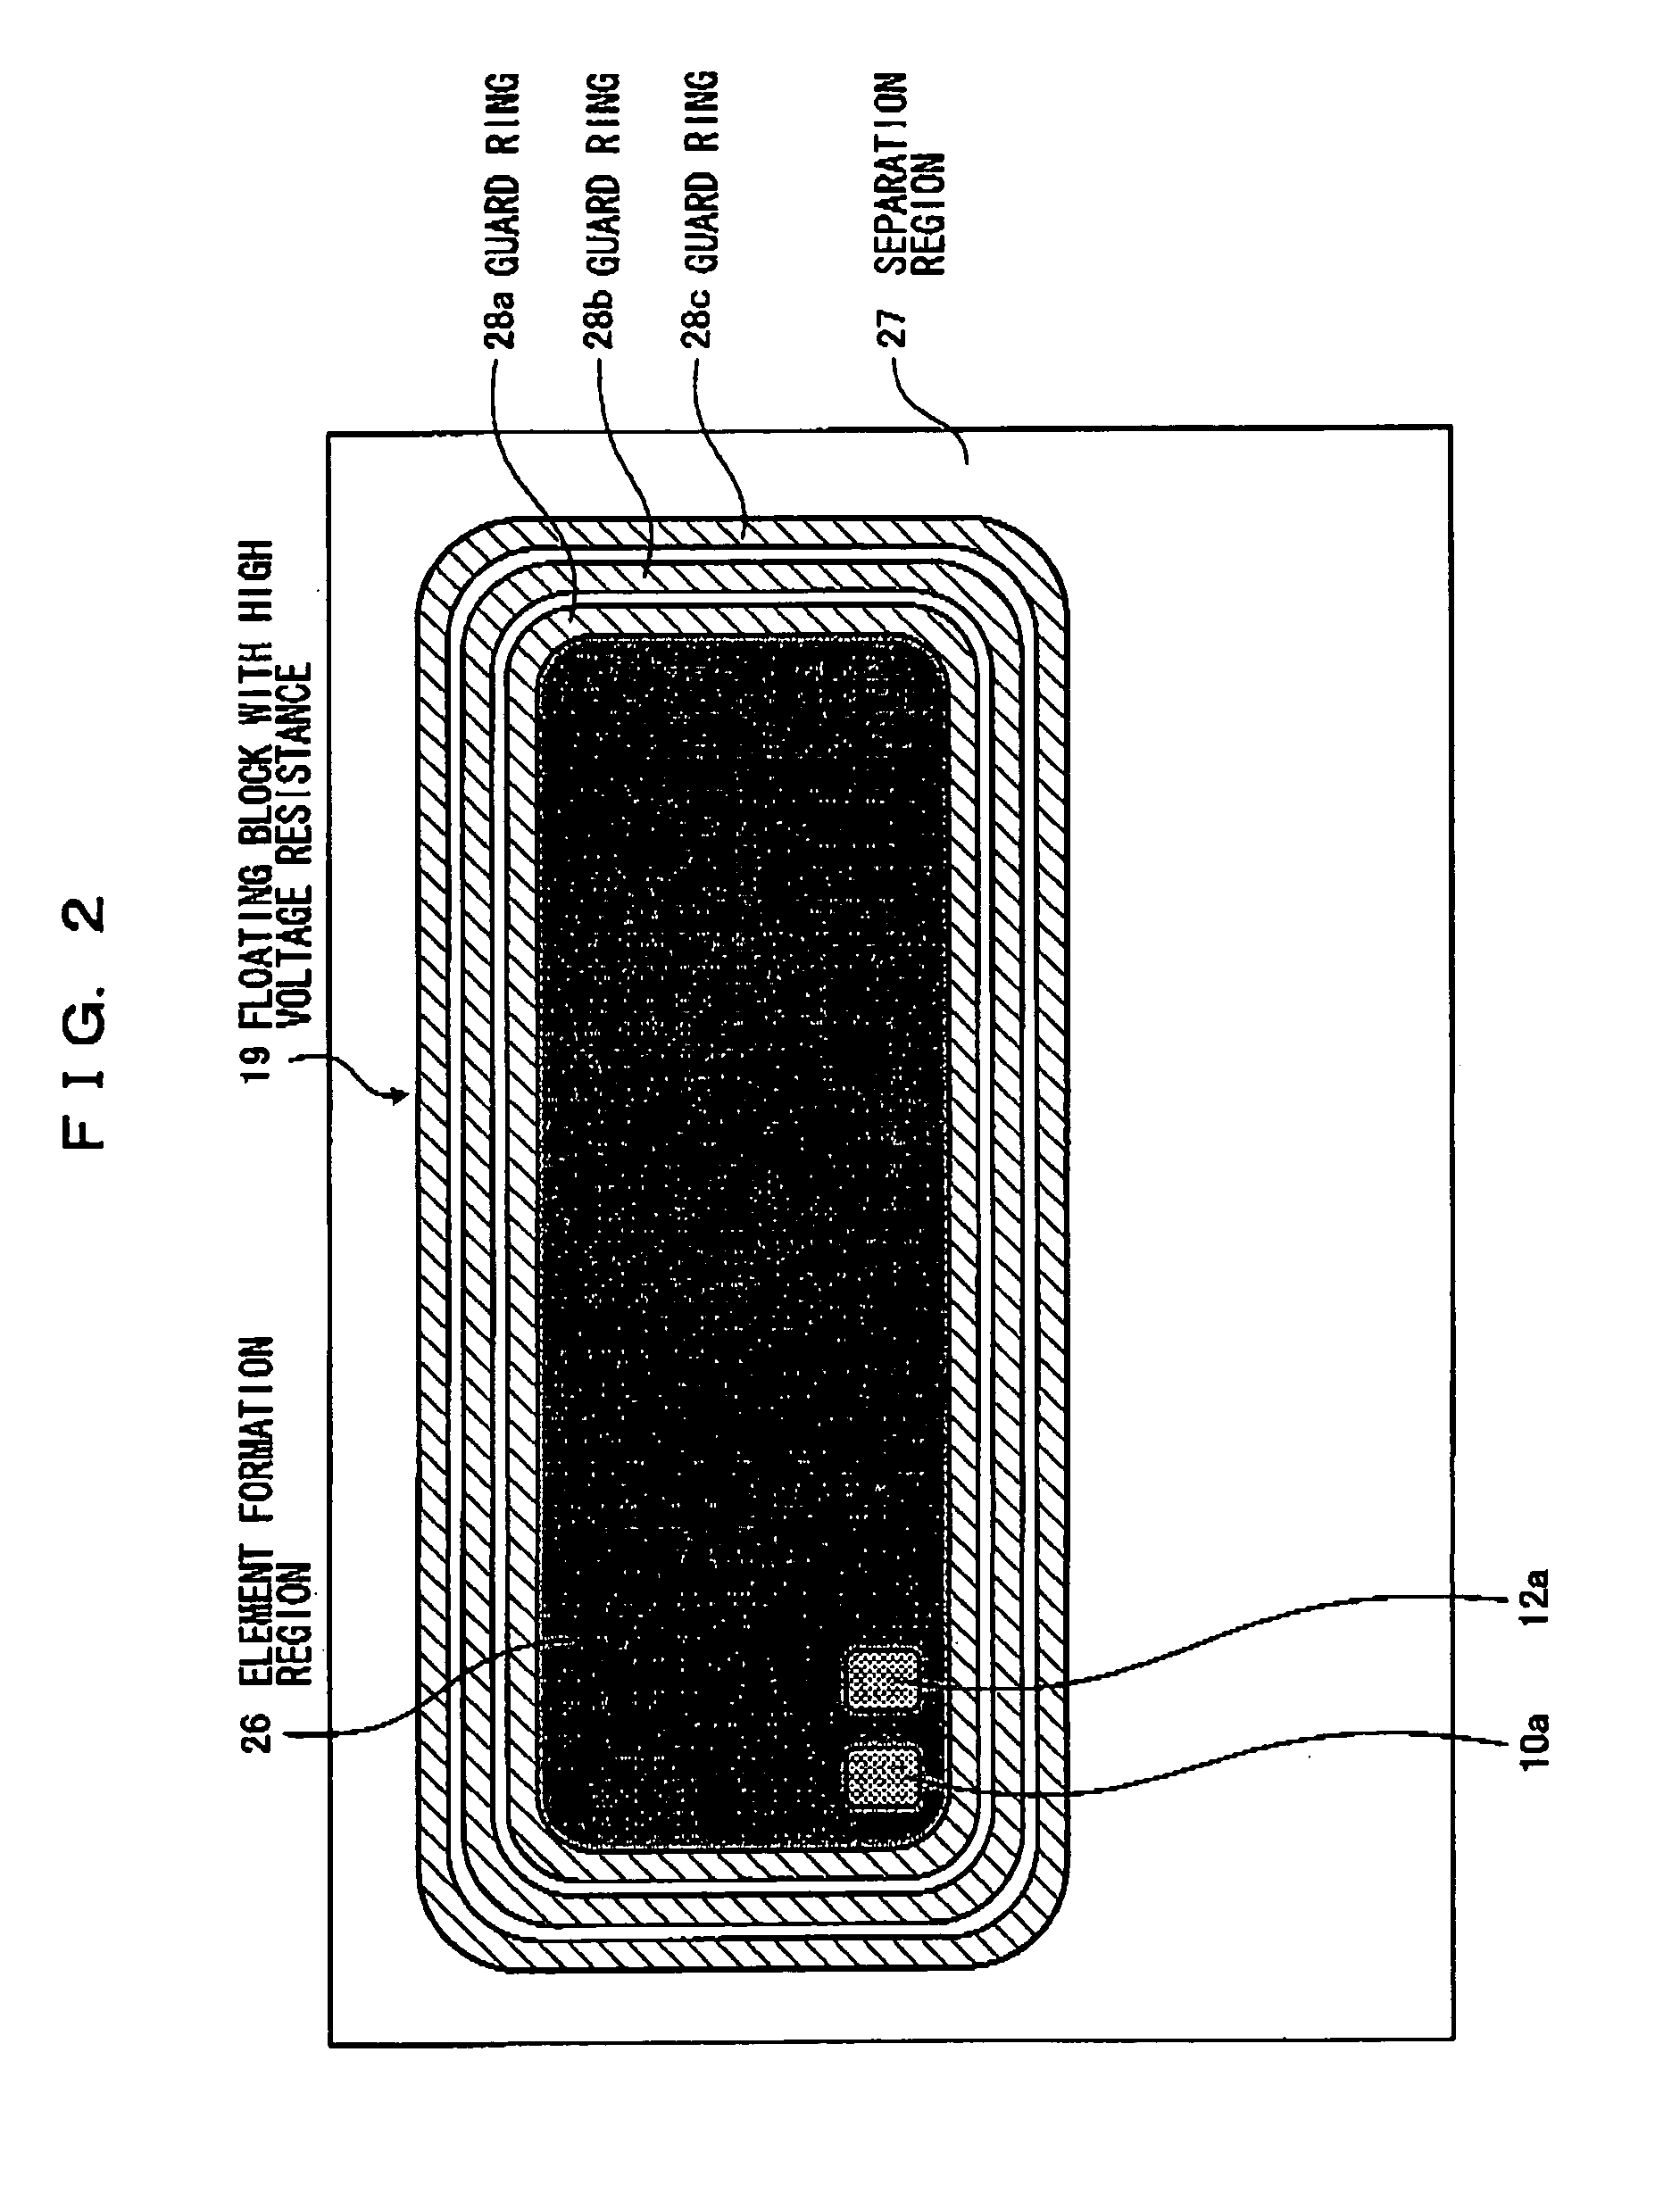 Semiconductor device with floating block